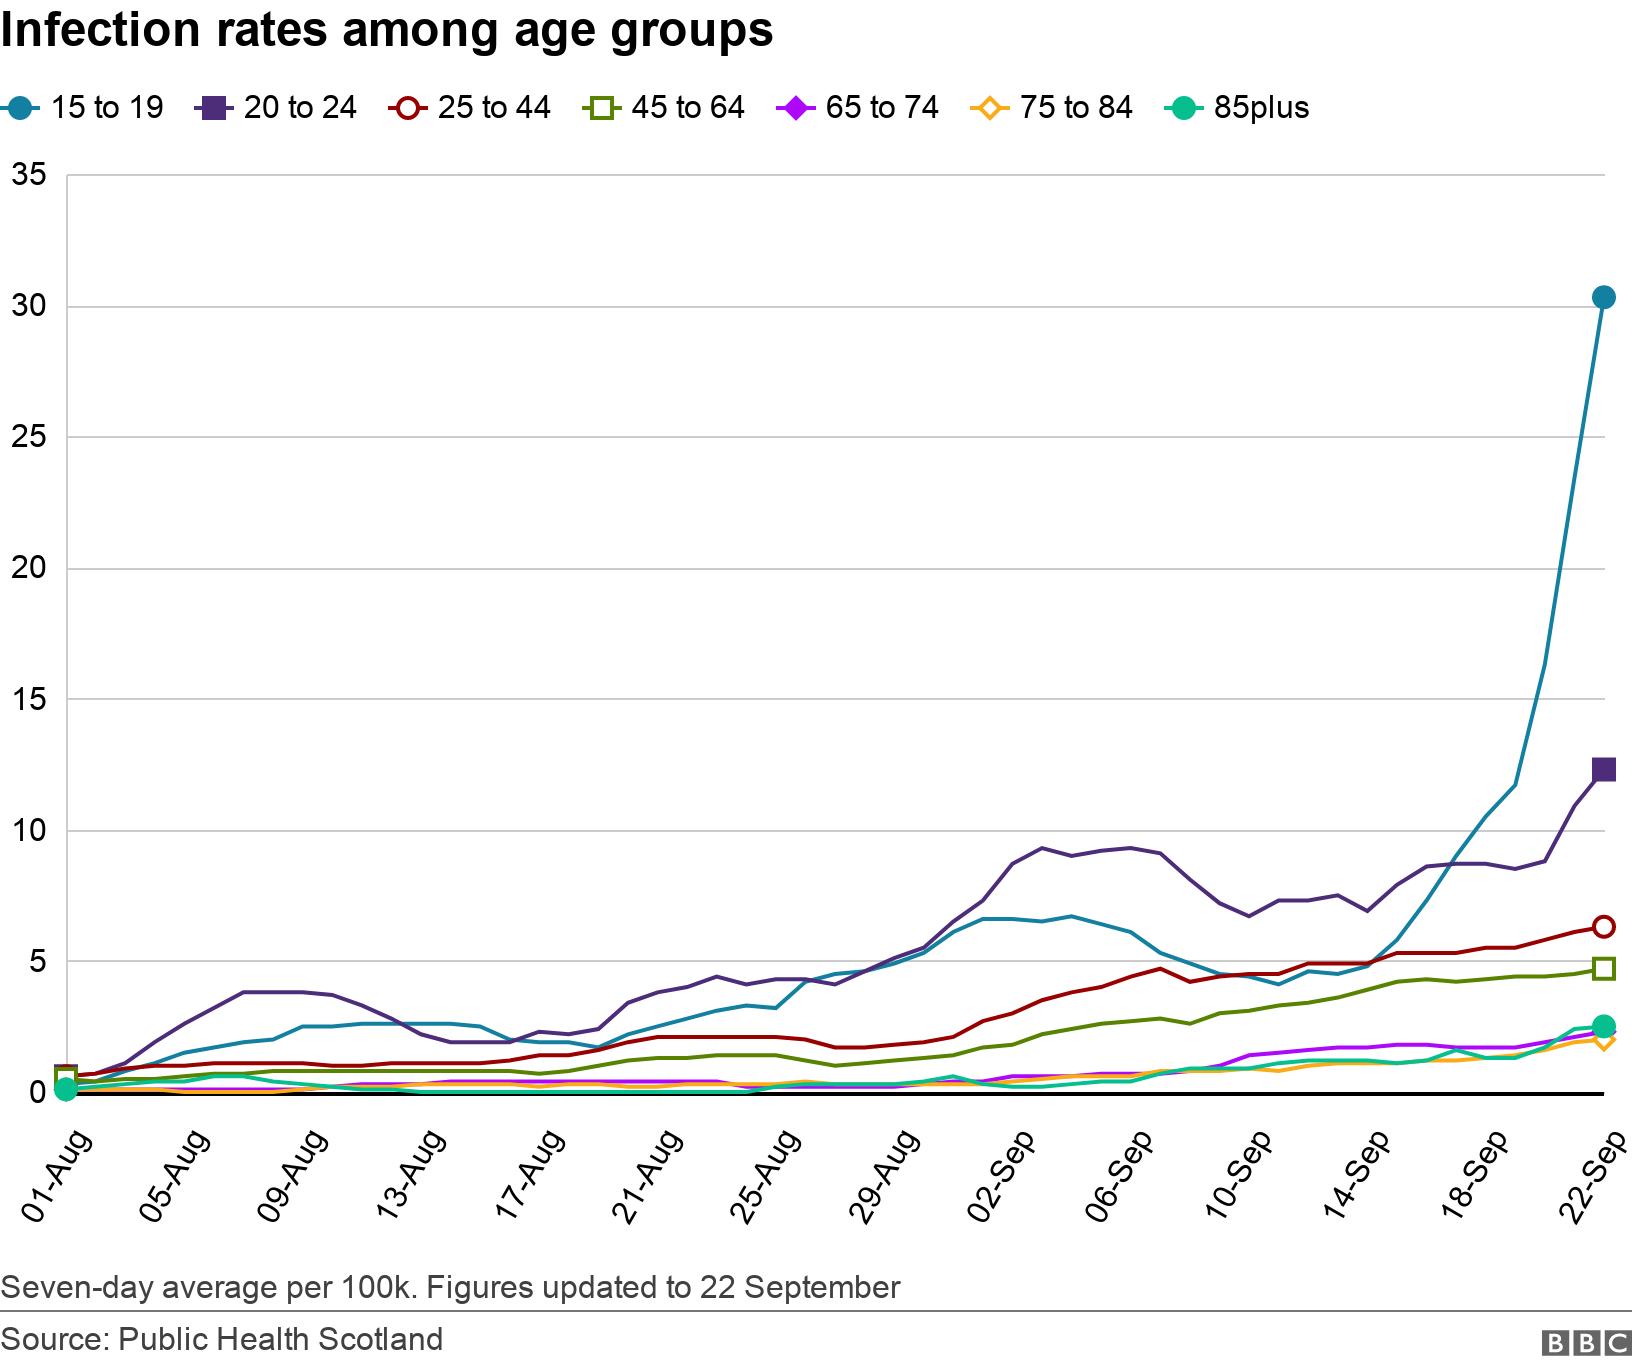 Infection rates among age groups. .  Seven-day average per 100k. Figures updated to 22 September.